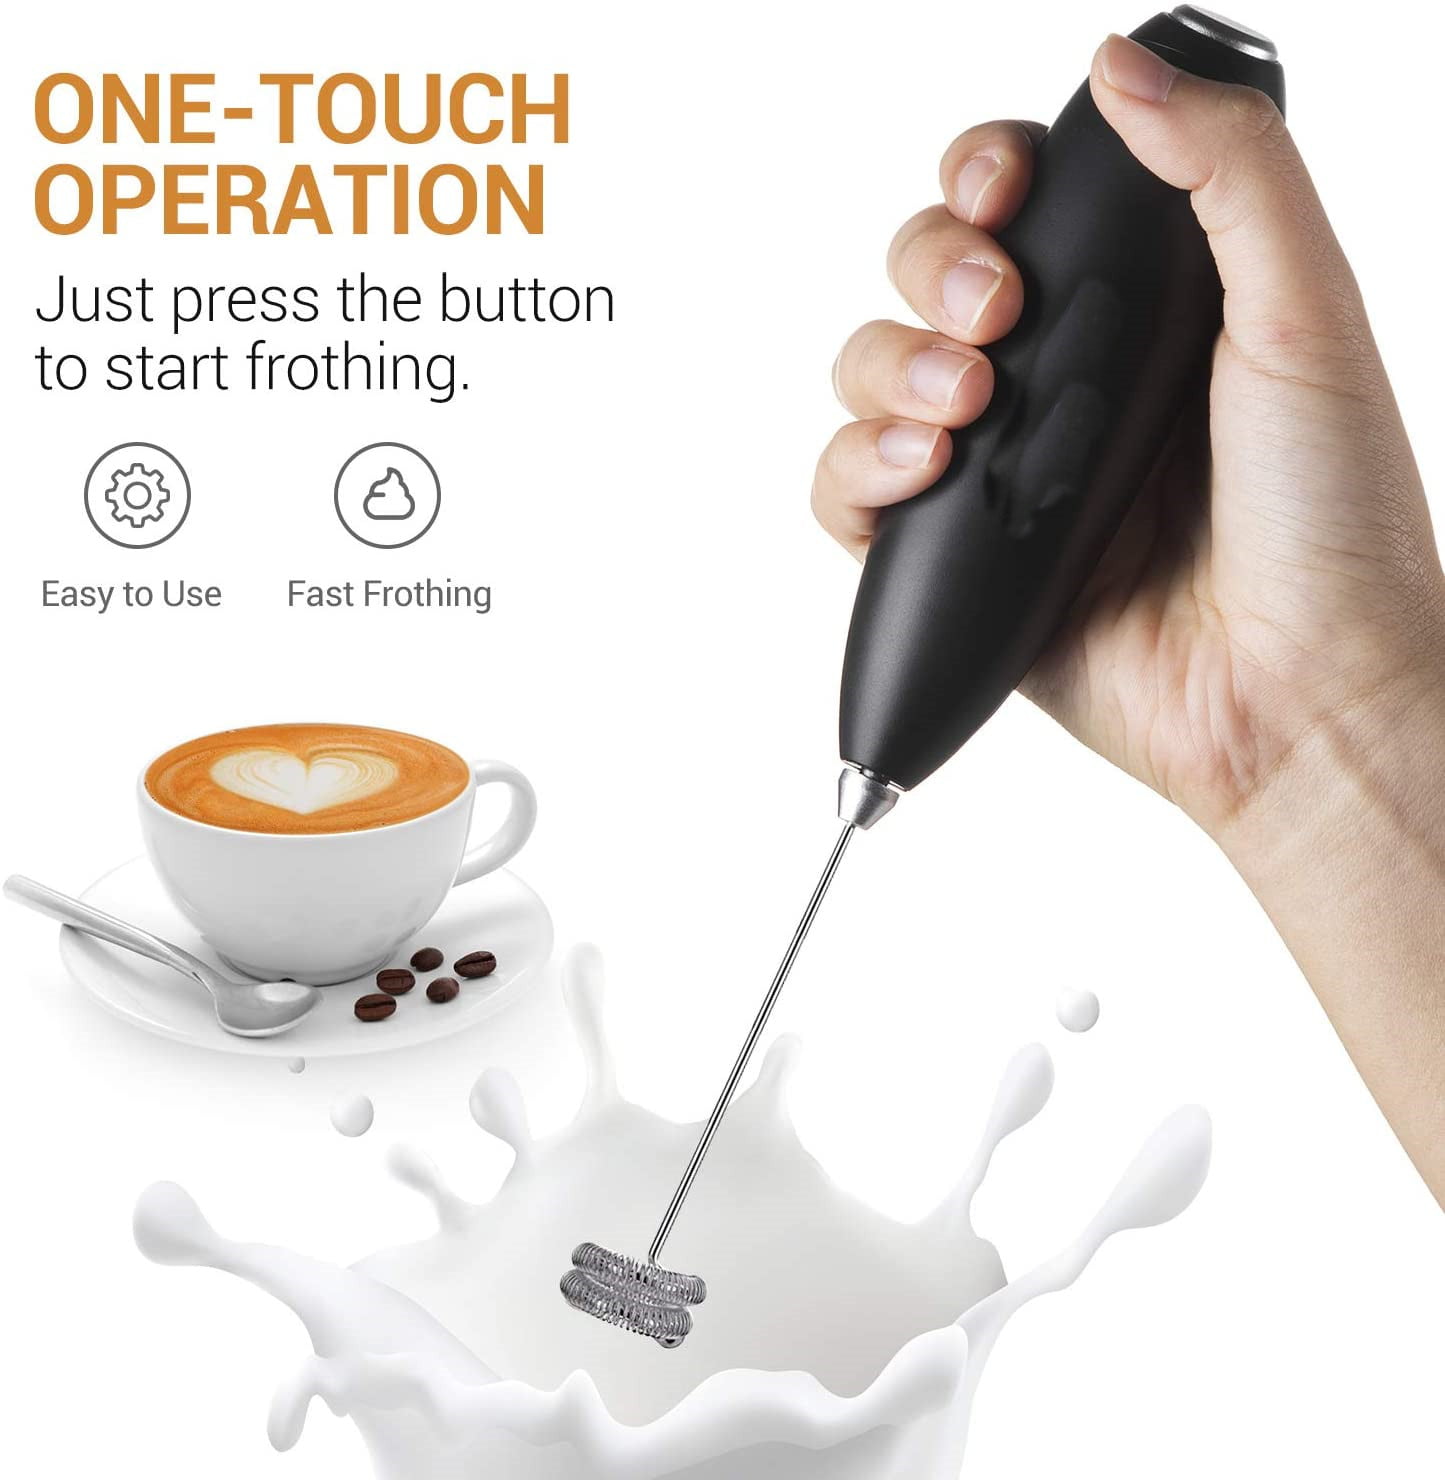  AREYCVK Handheld milk frother Small mixer for drinks Whisk  Frother of Battery Operated,Stainless Steel Frother  forlatte,cappuccino,hot,chocolate, Matcha(BLCAK): Home & Kitchen